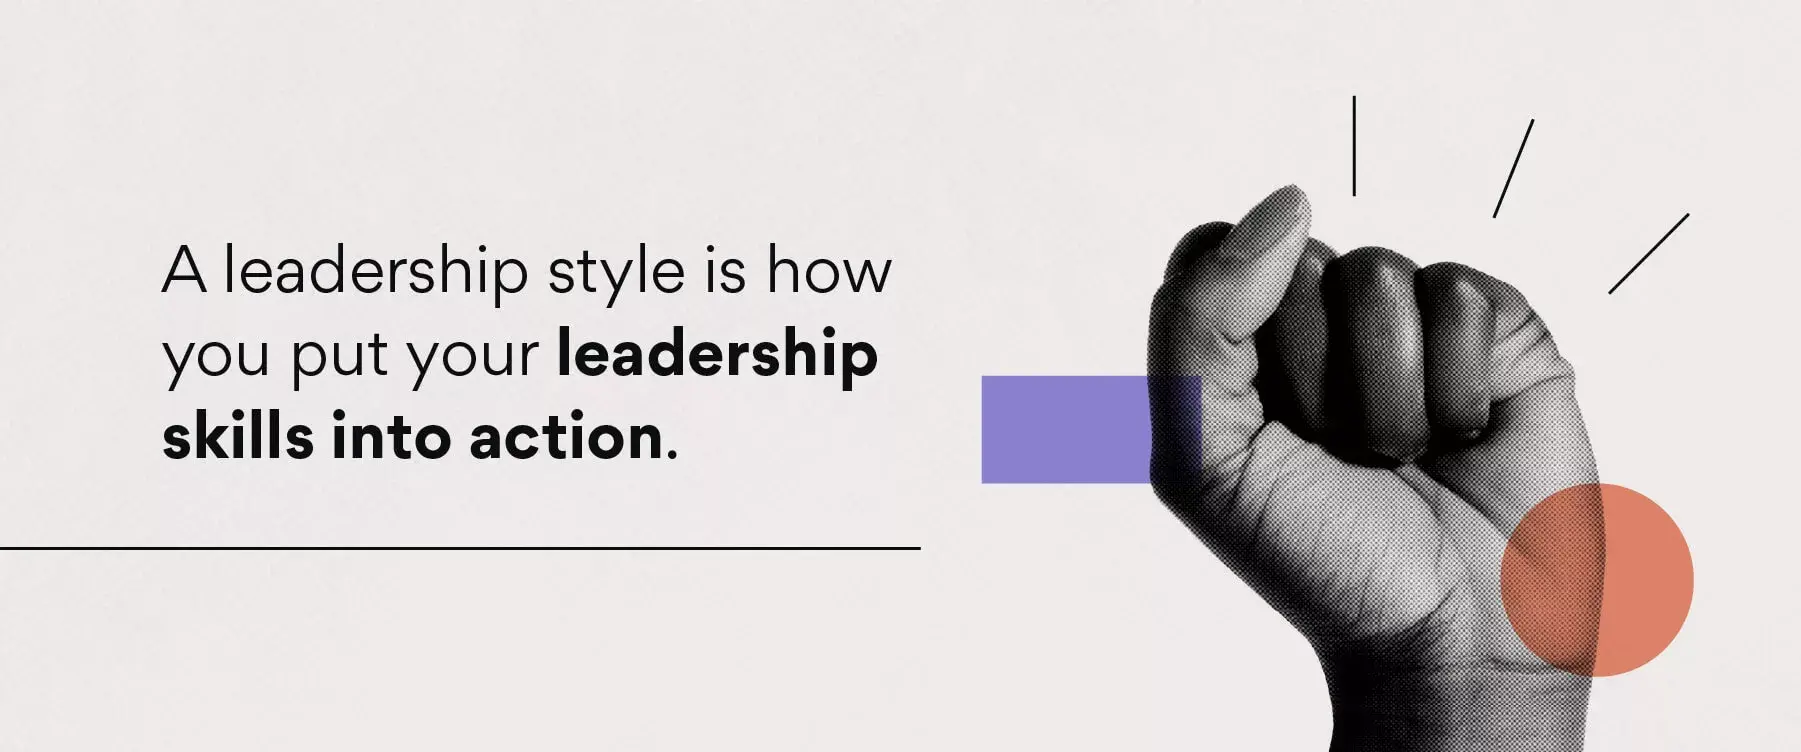 Turning leadership styles into action